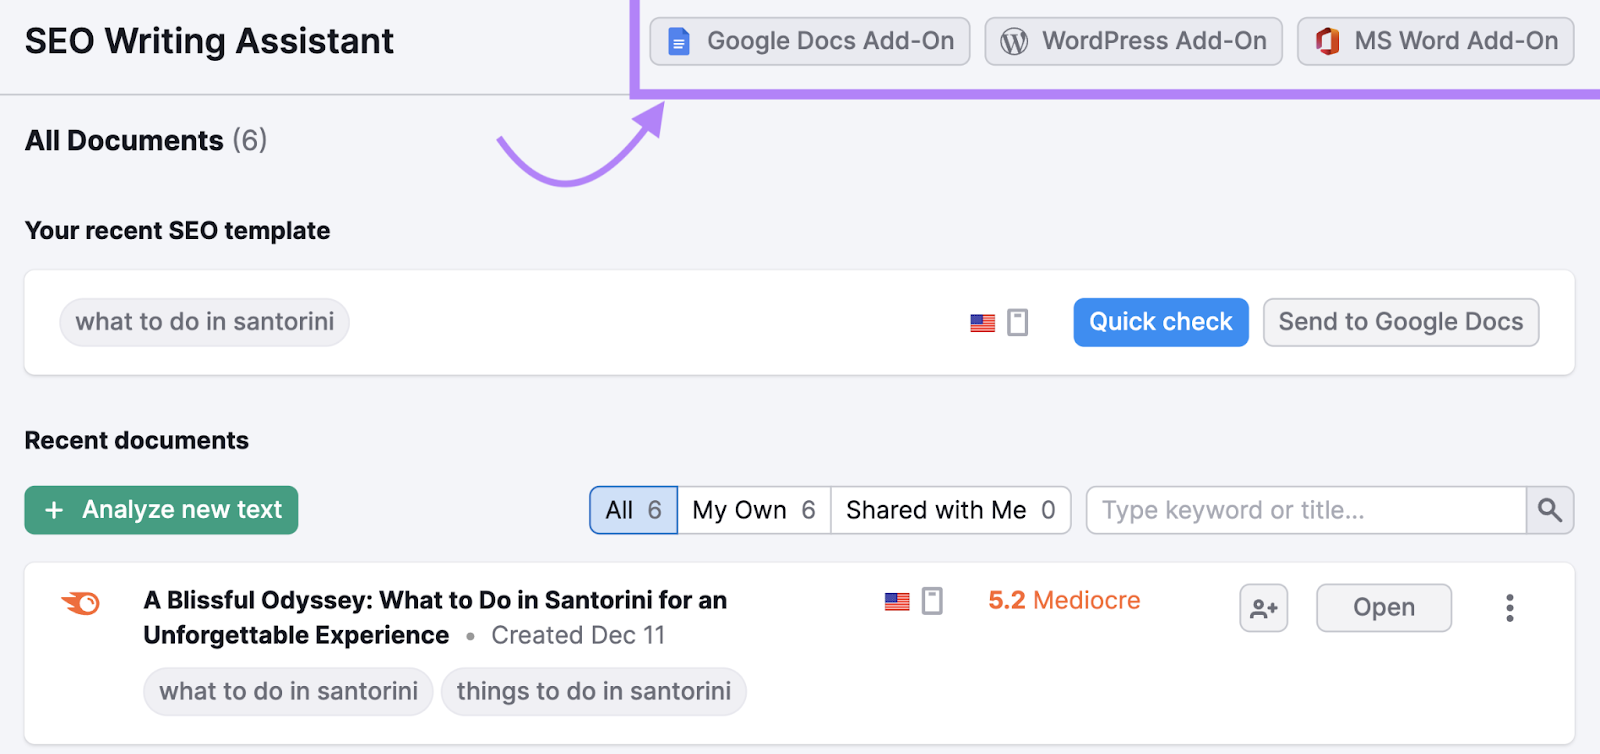 Google Docs, WordPress, and Microsoft Word add-ons highlighted